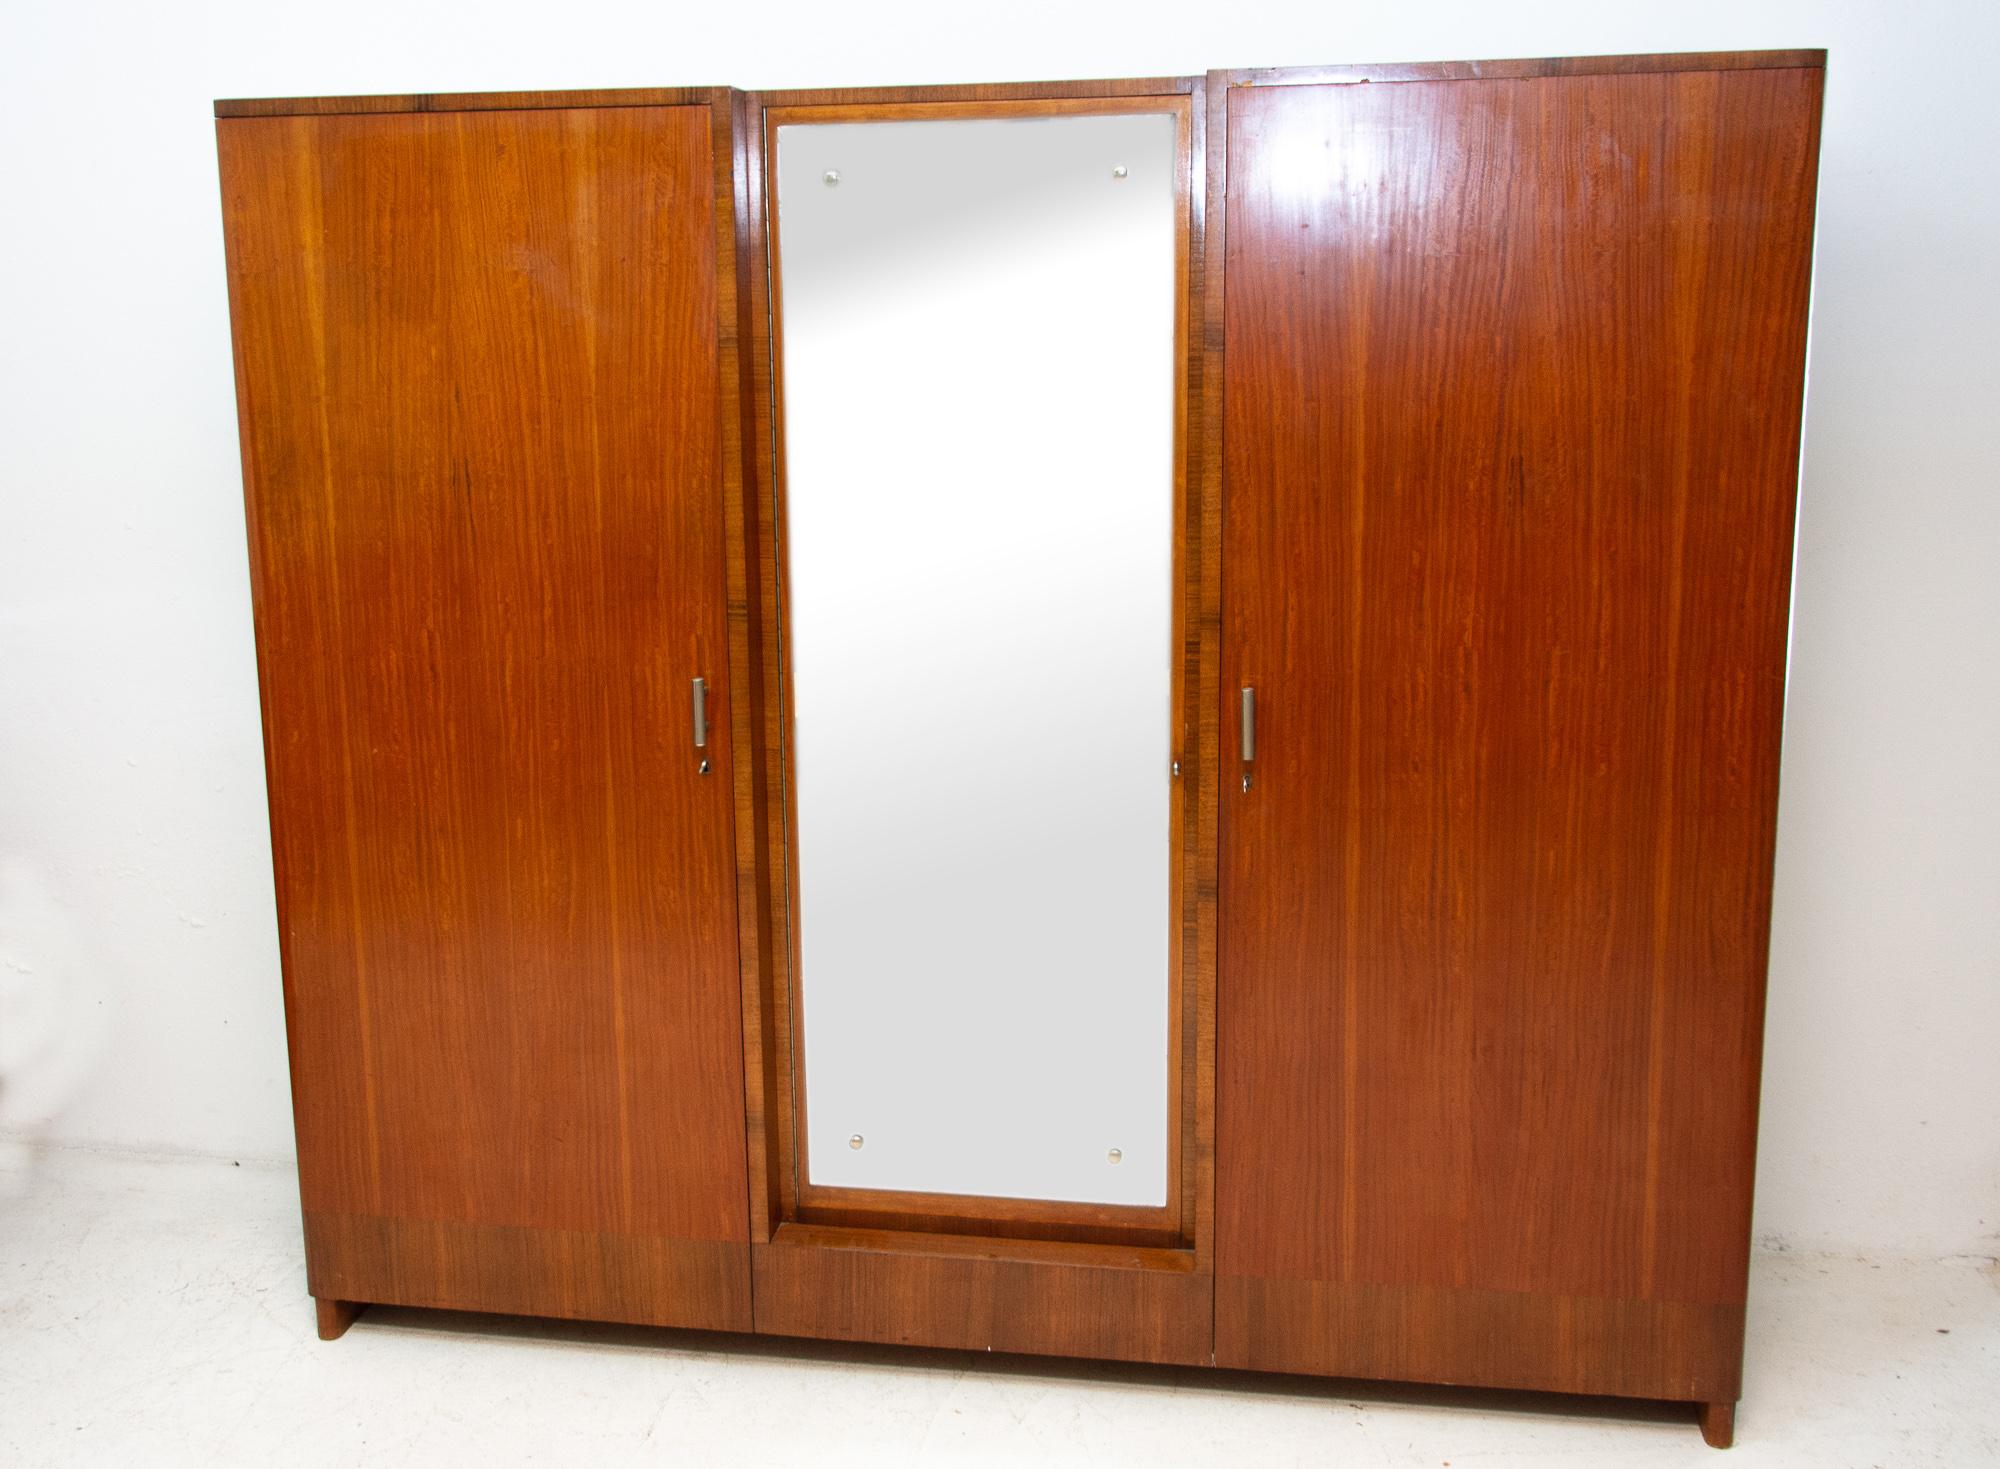 This elegant glassed wardrobe with an unusual internal arrangement was made in the 1930s as part of functionalist bedroom. It was designed by the prominent Prague architect Vlastimil Brožek. It is made of solid wood and is veneered in walnut. It